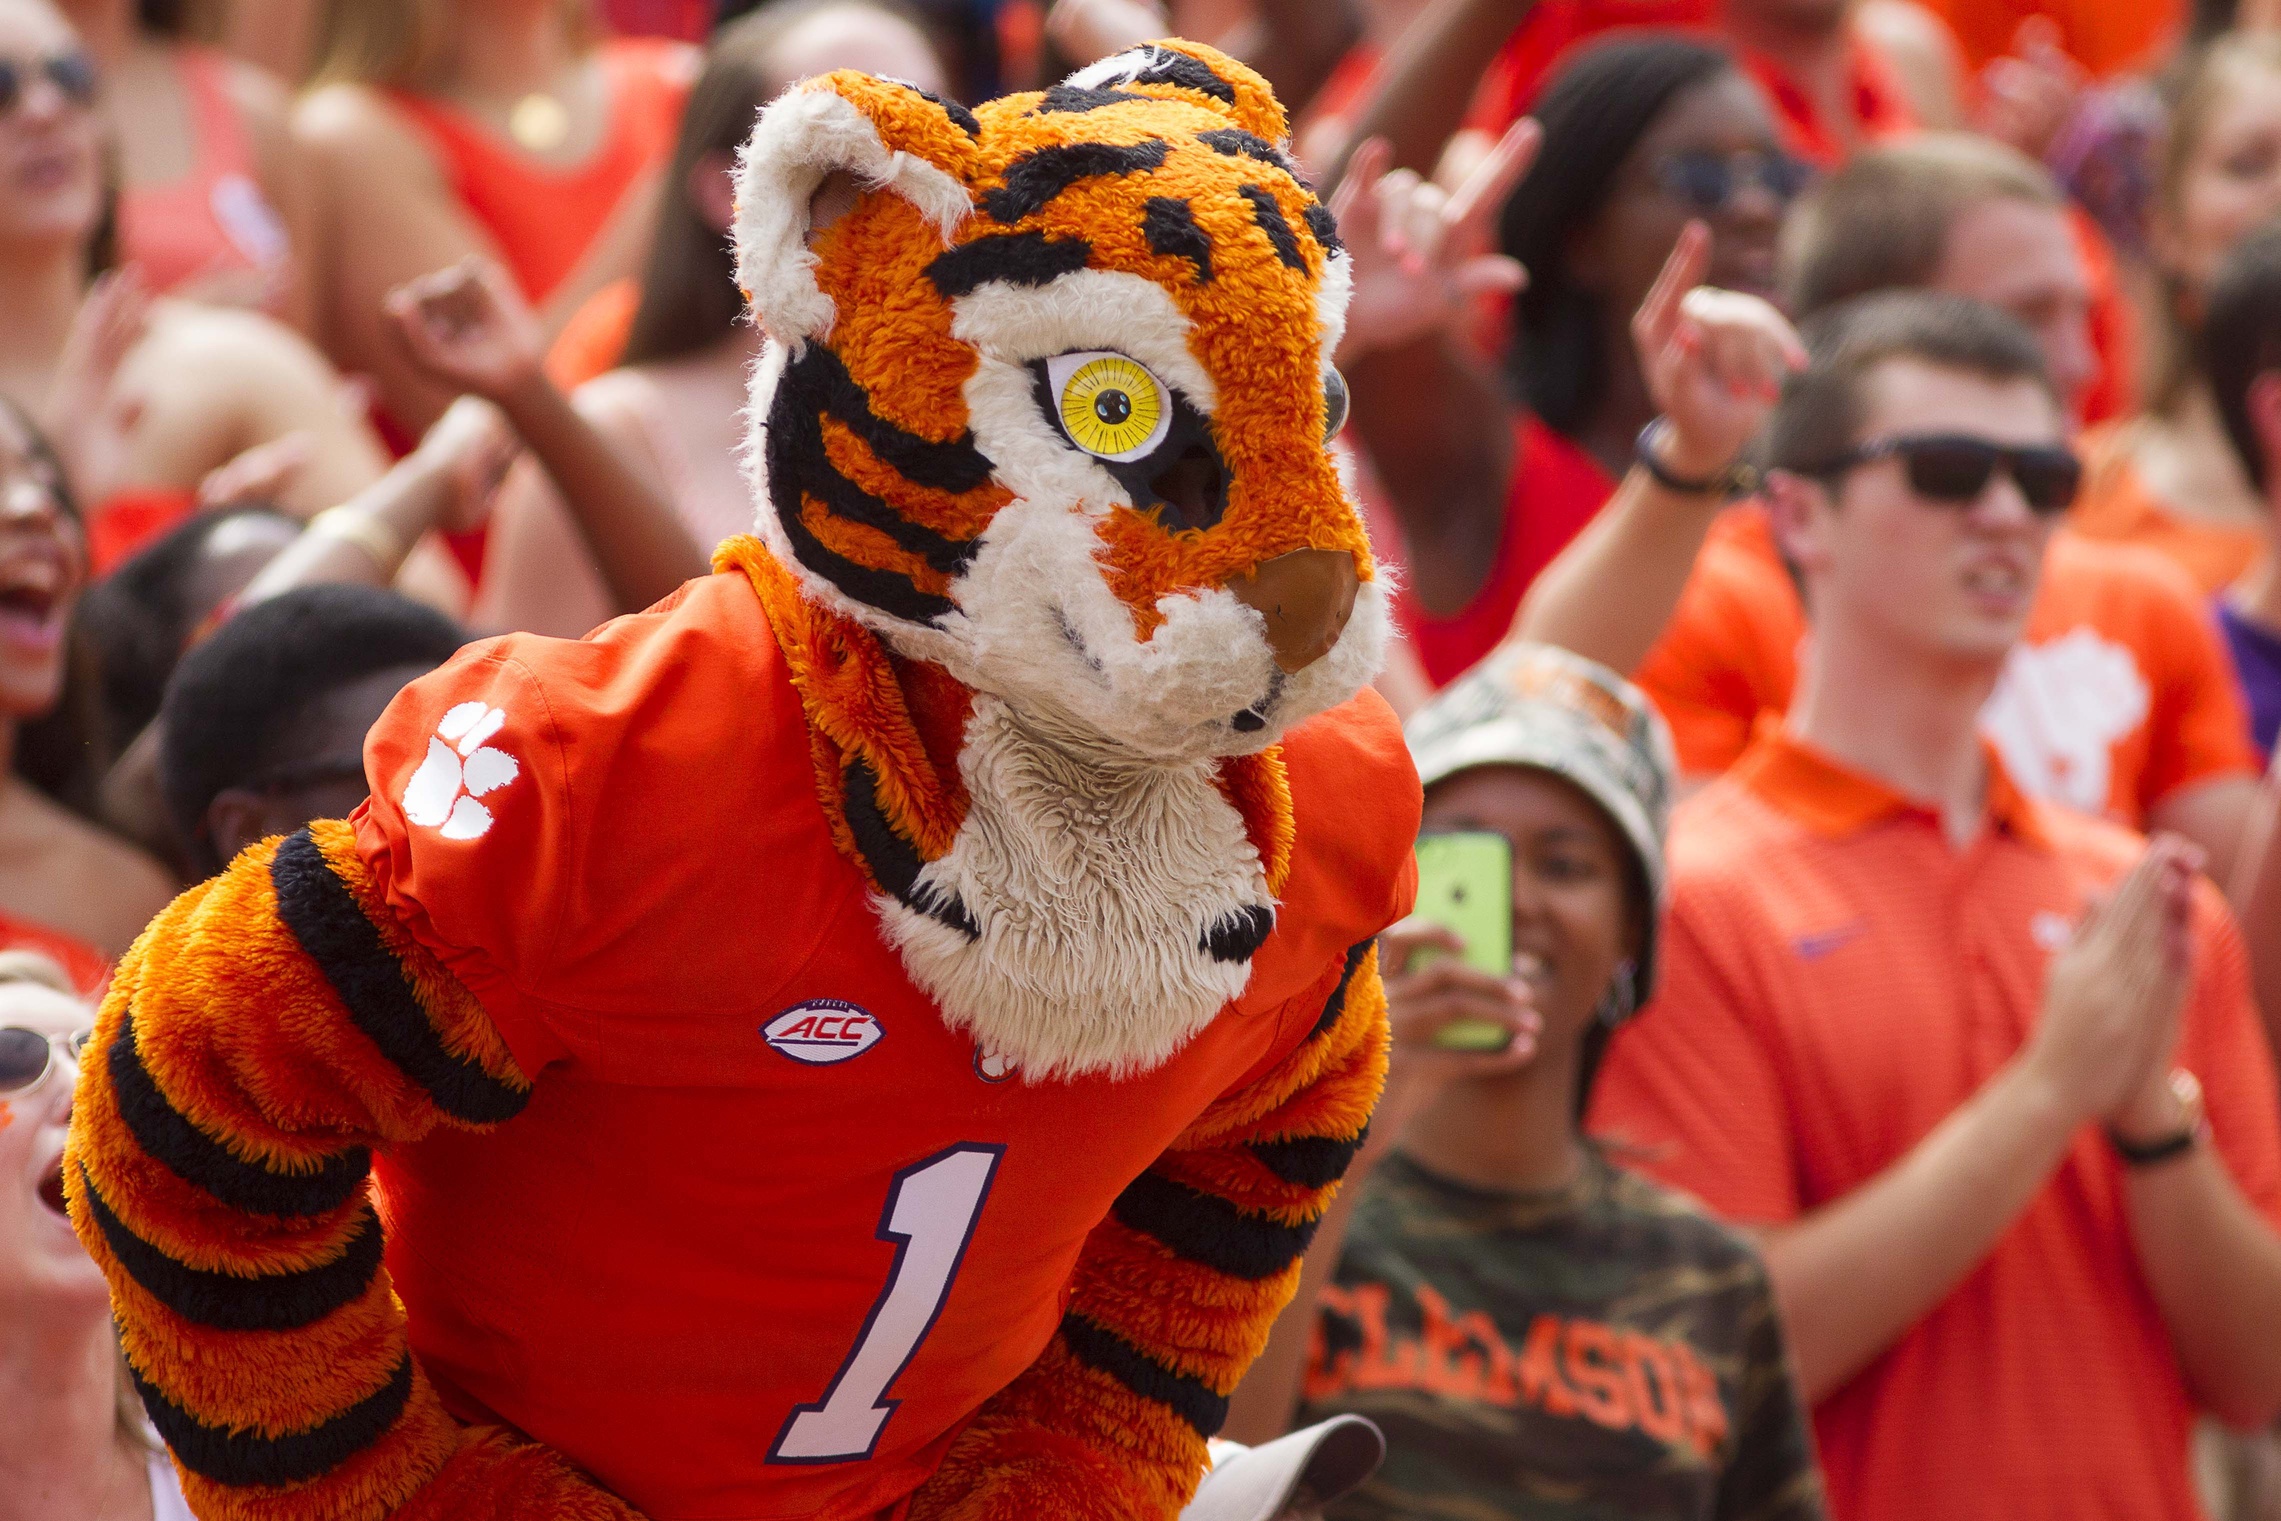 Sep 5, 2015; Clemson, SC, USA; Clemson Tigers mascot looks on during the first quarter against the Wofford Terriers at Clemson Memorial Stadium. Tigers won 49-10. Mandatory Credit: Joshua S. Kelly-USA TODAY Sports